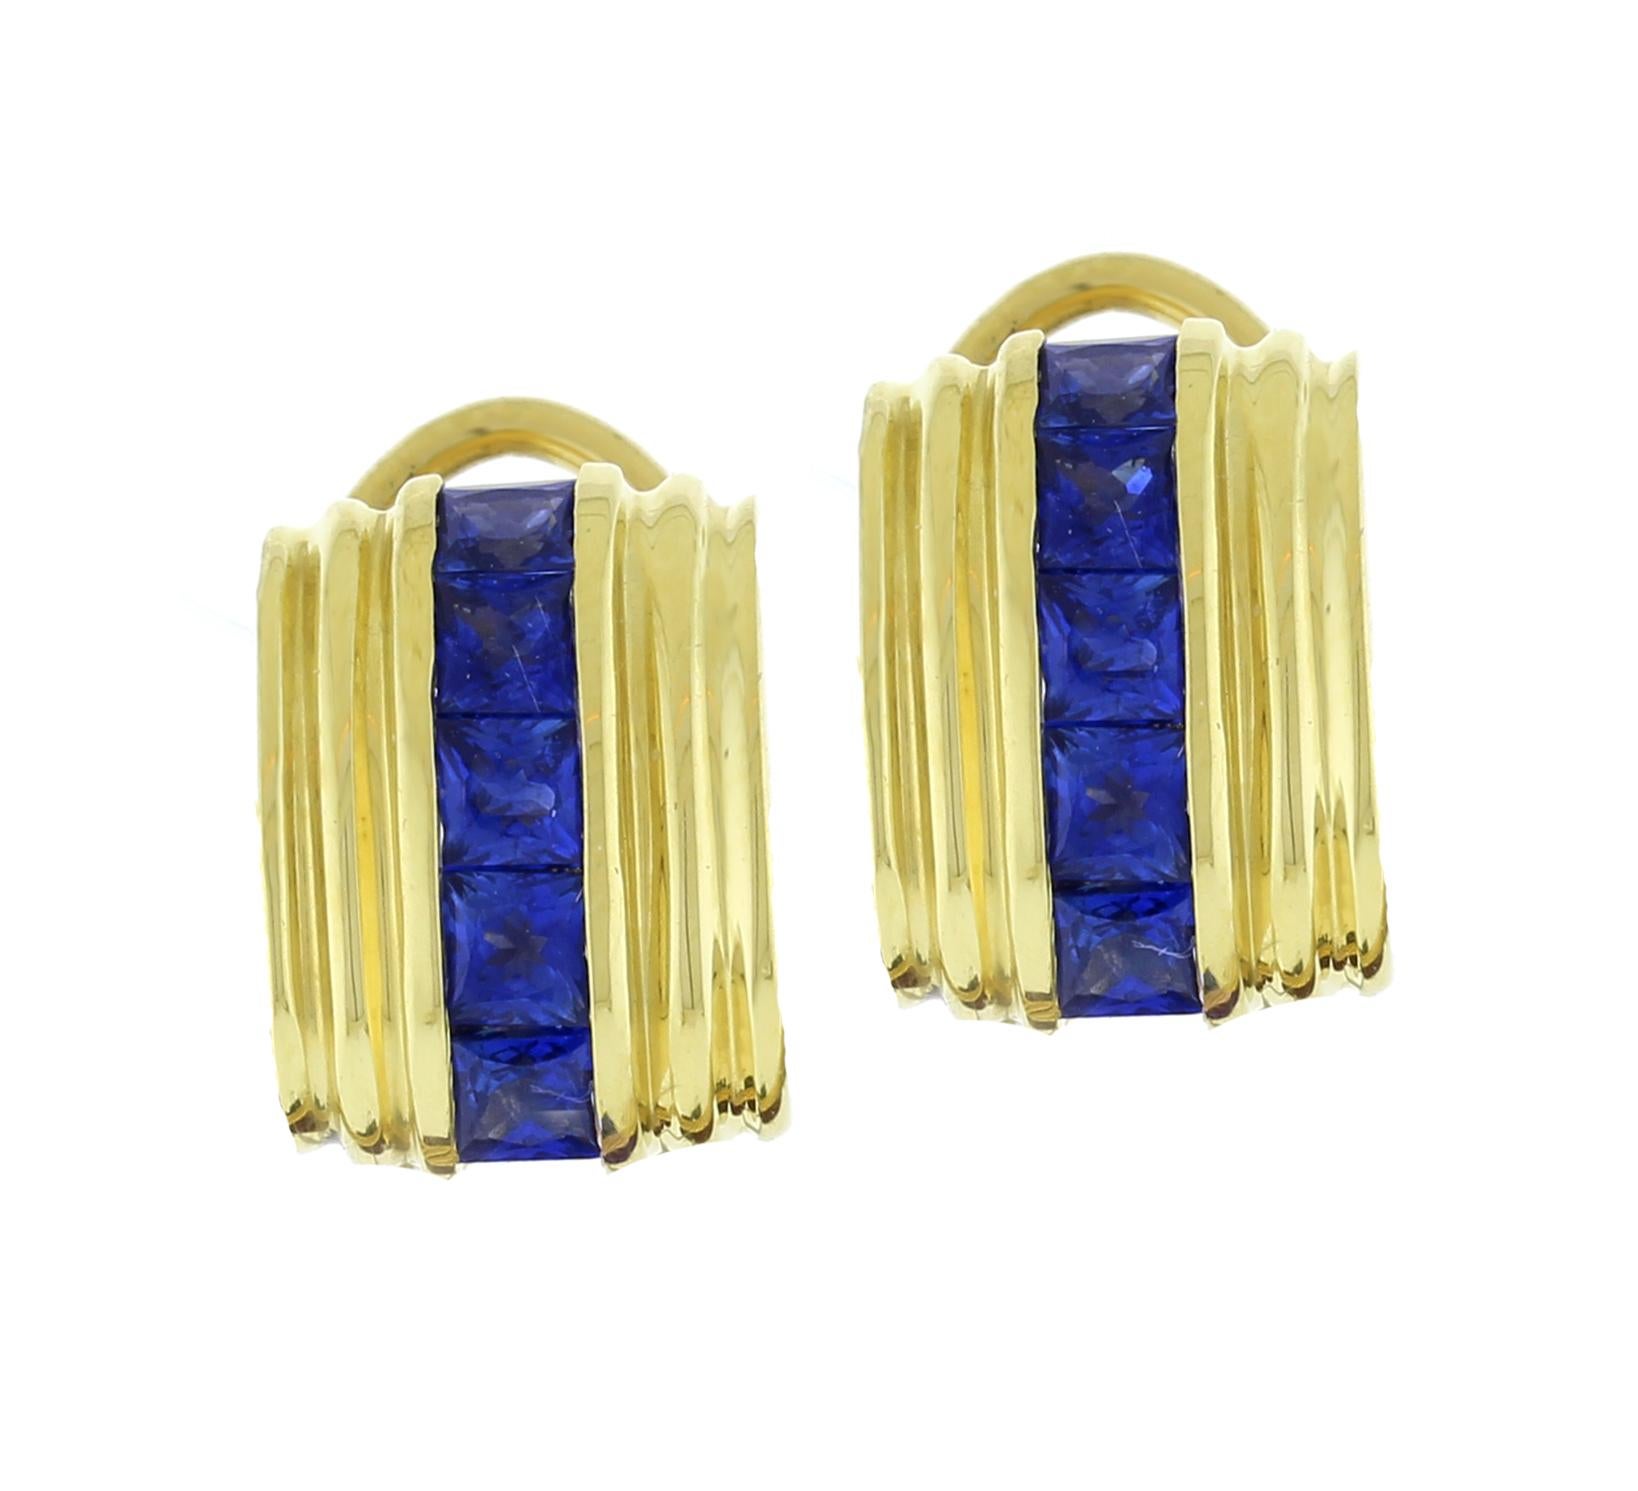 From David Yurman, these earrings have a hoop that can be detached.  Each earring has 5 square cut sapphires.
♦ Designer: David Yurman
♦ Metal: 18kt yellow gold
♦ Gemstone: 10 sapphires
♦ Length: 1.25
♦ Weight: 21grams
♦ Packaging: Pampillonia